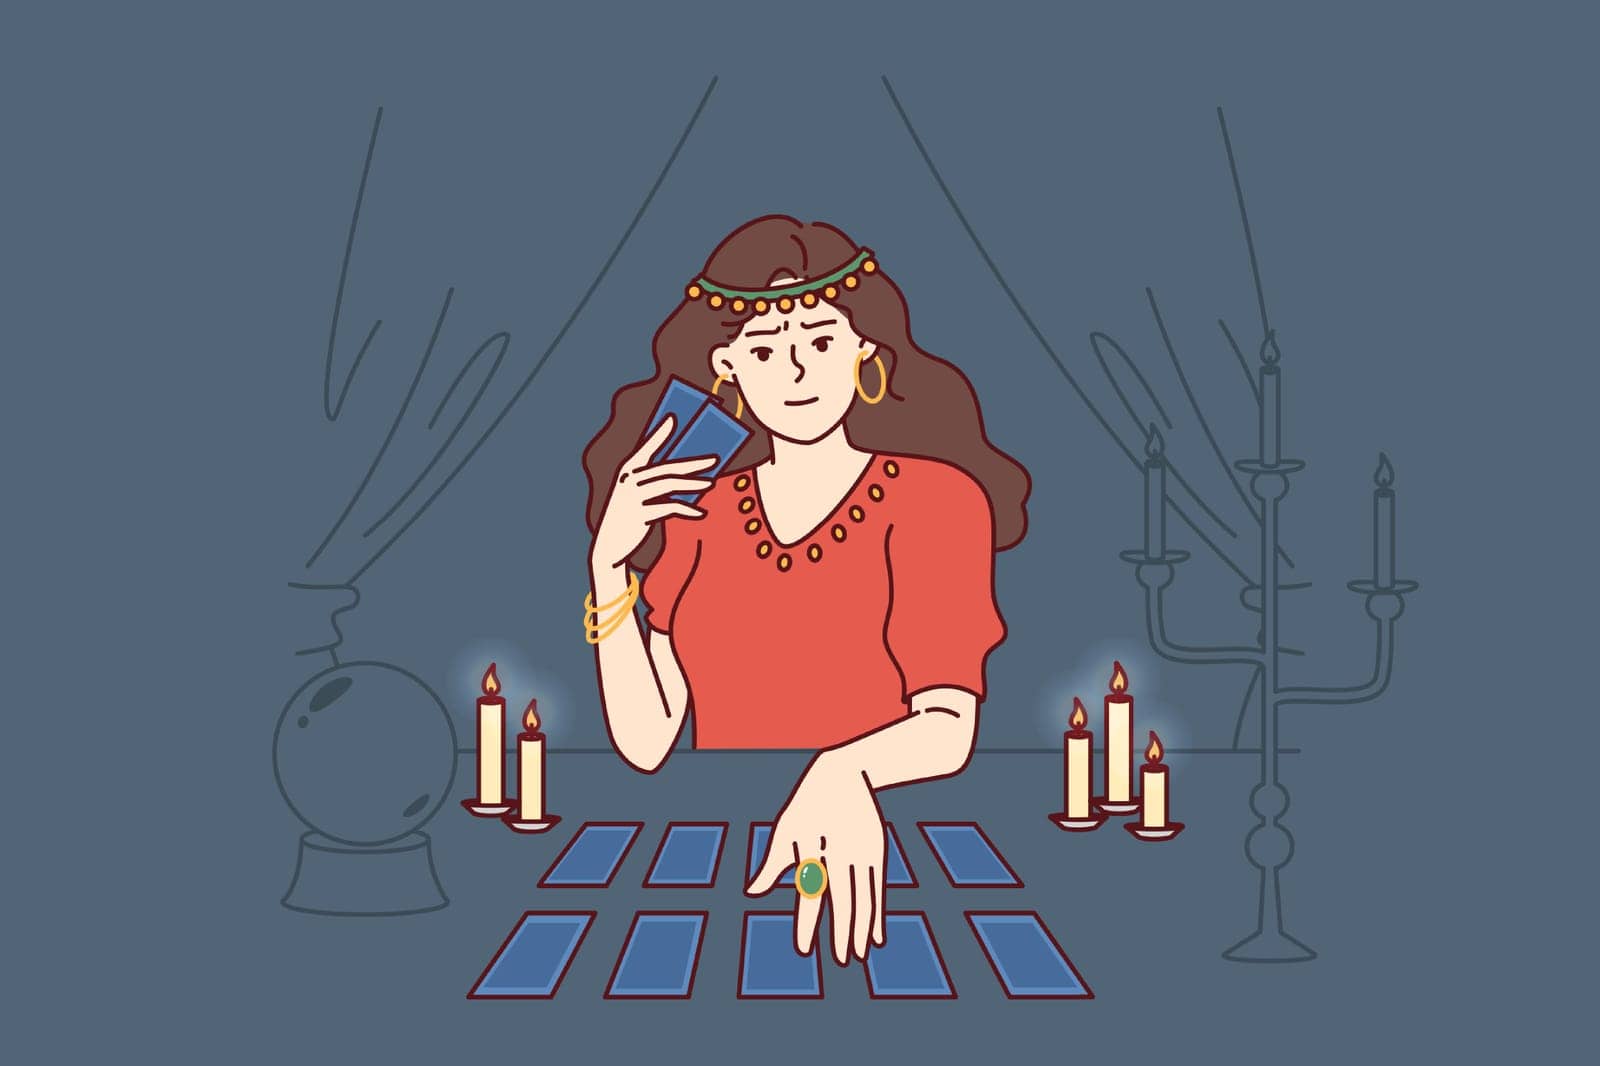 Soothsayer woman holds tarot cards predicting future and performing magical ritual to bewitch betrothed. Soothsayer girl sits at table with candles and mysterious ball for communicating with spirits